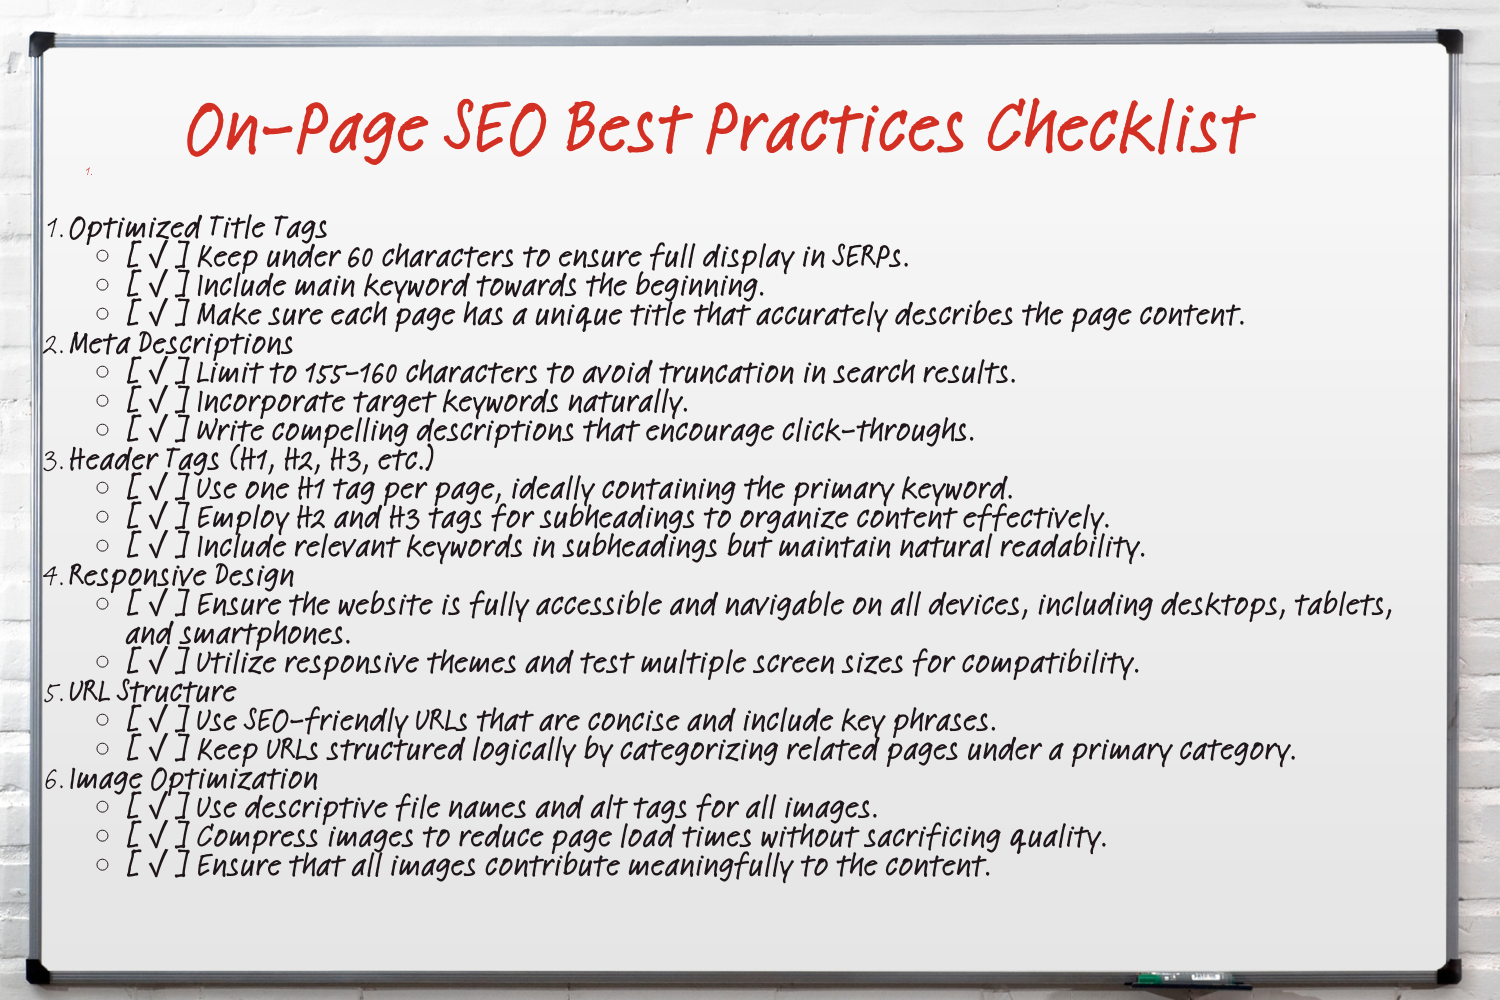 On-Page Seo Best Practices Checklist